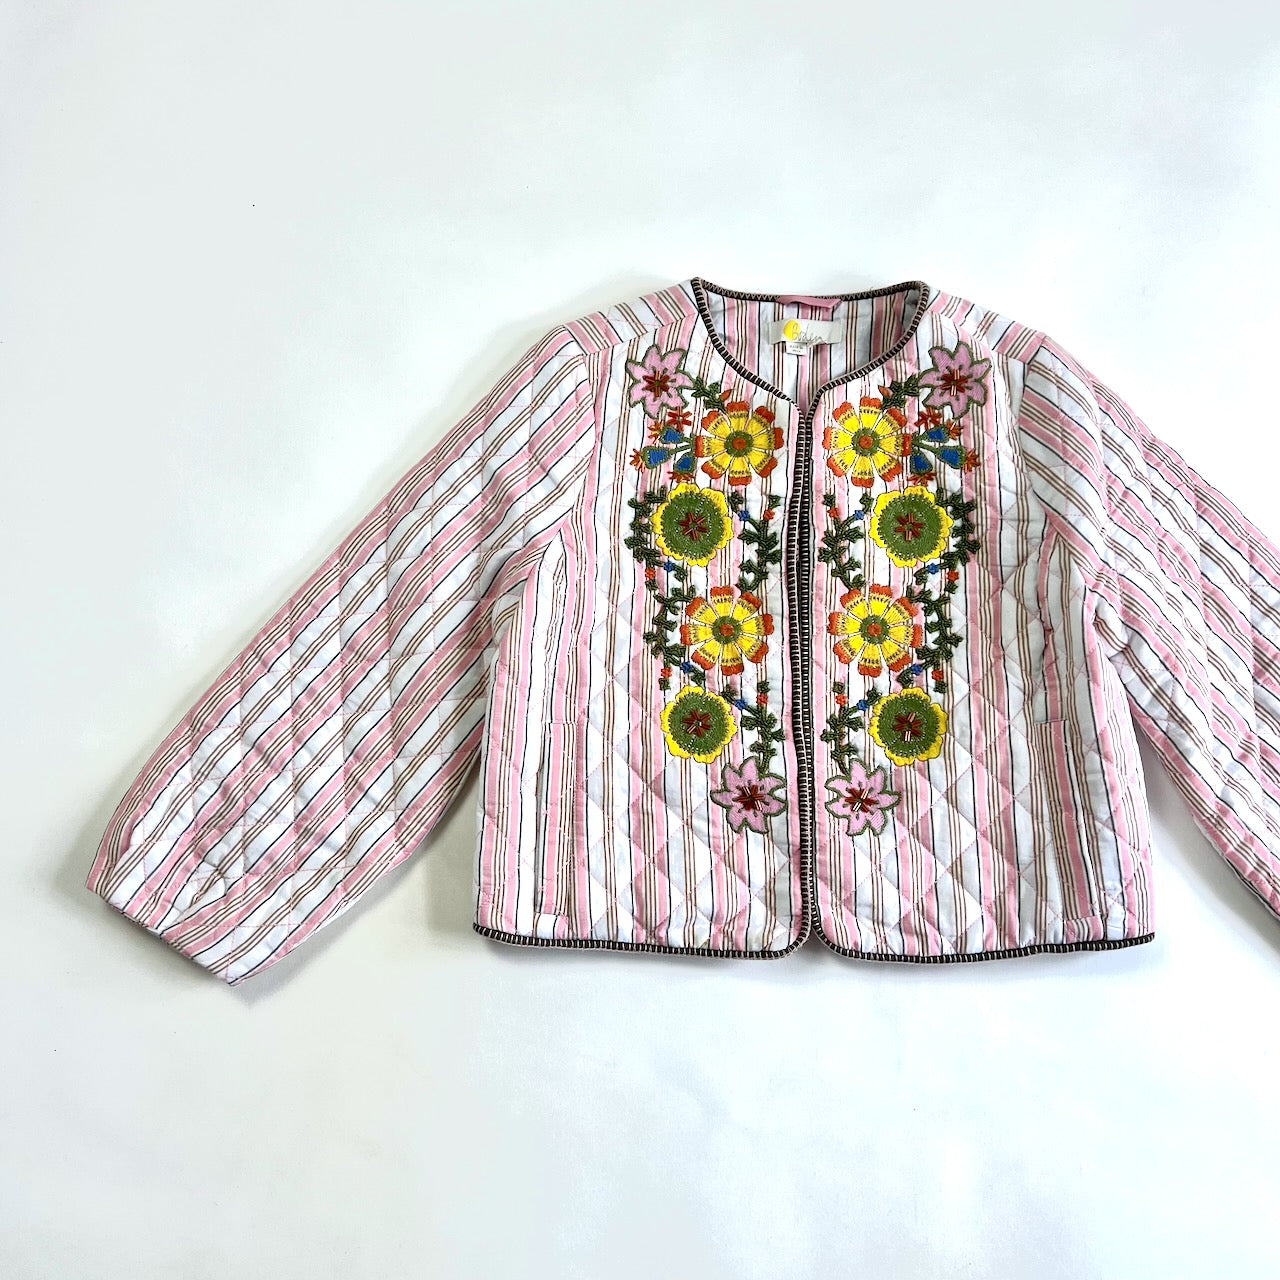 Boden Embroidered Quilted Jacket in White